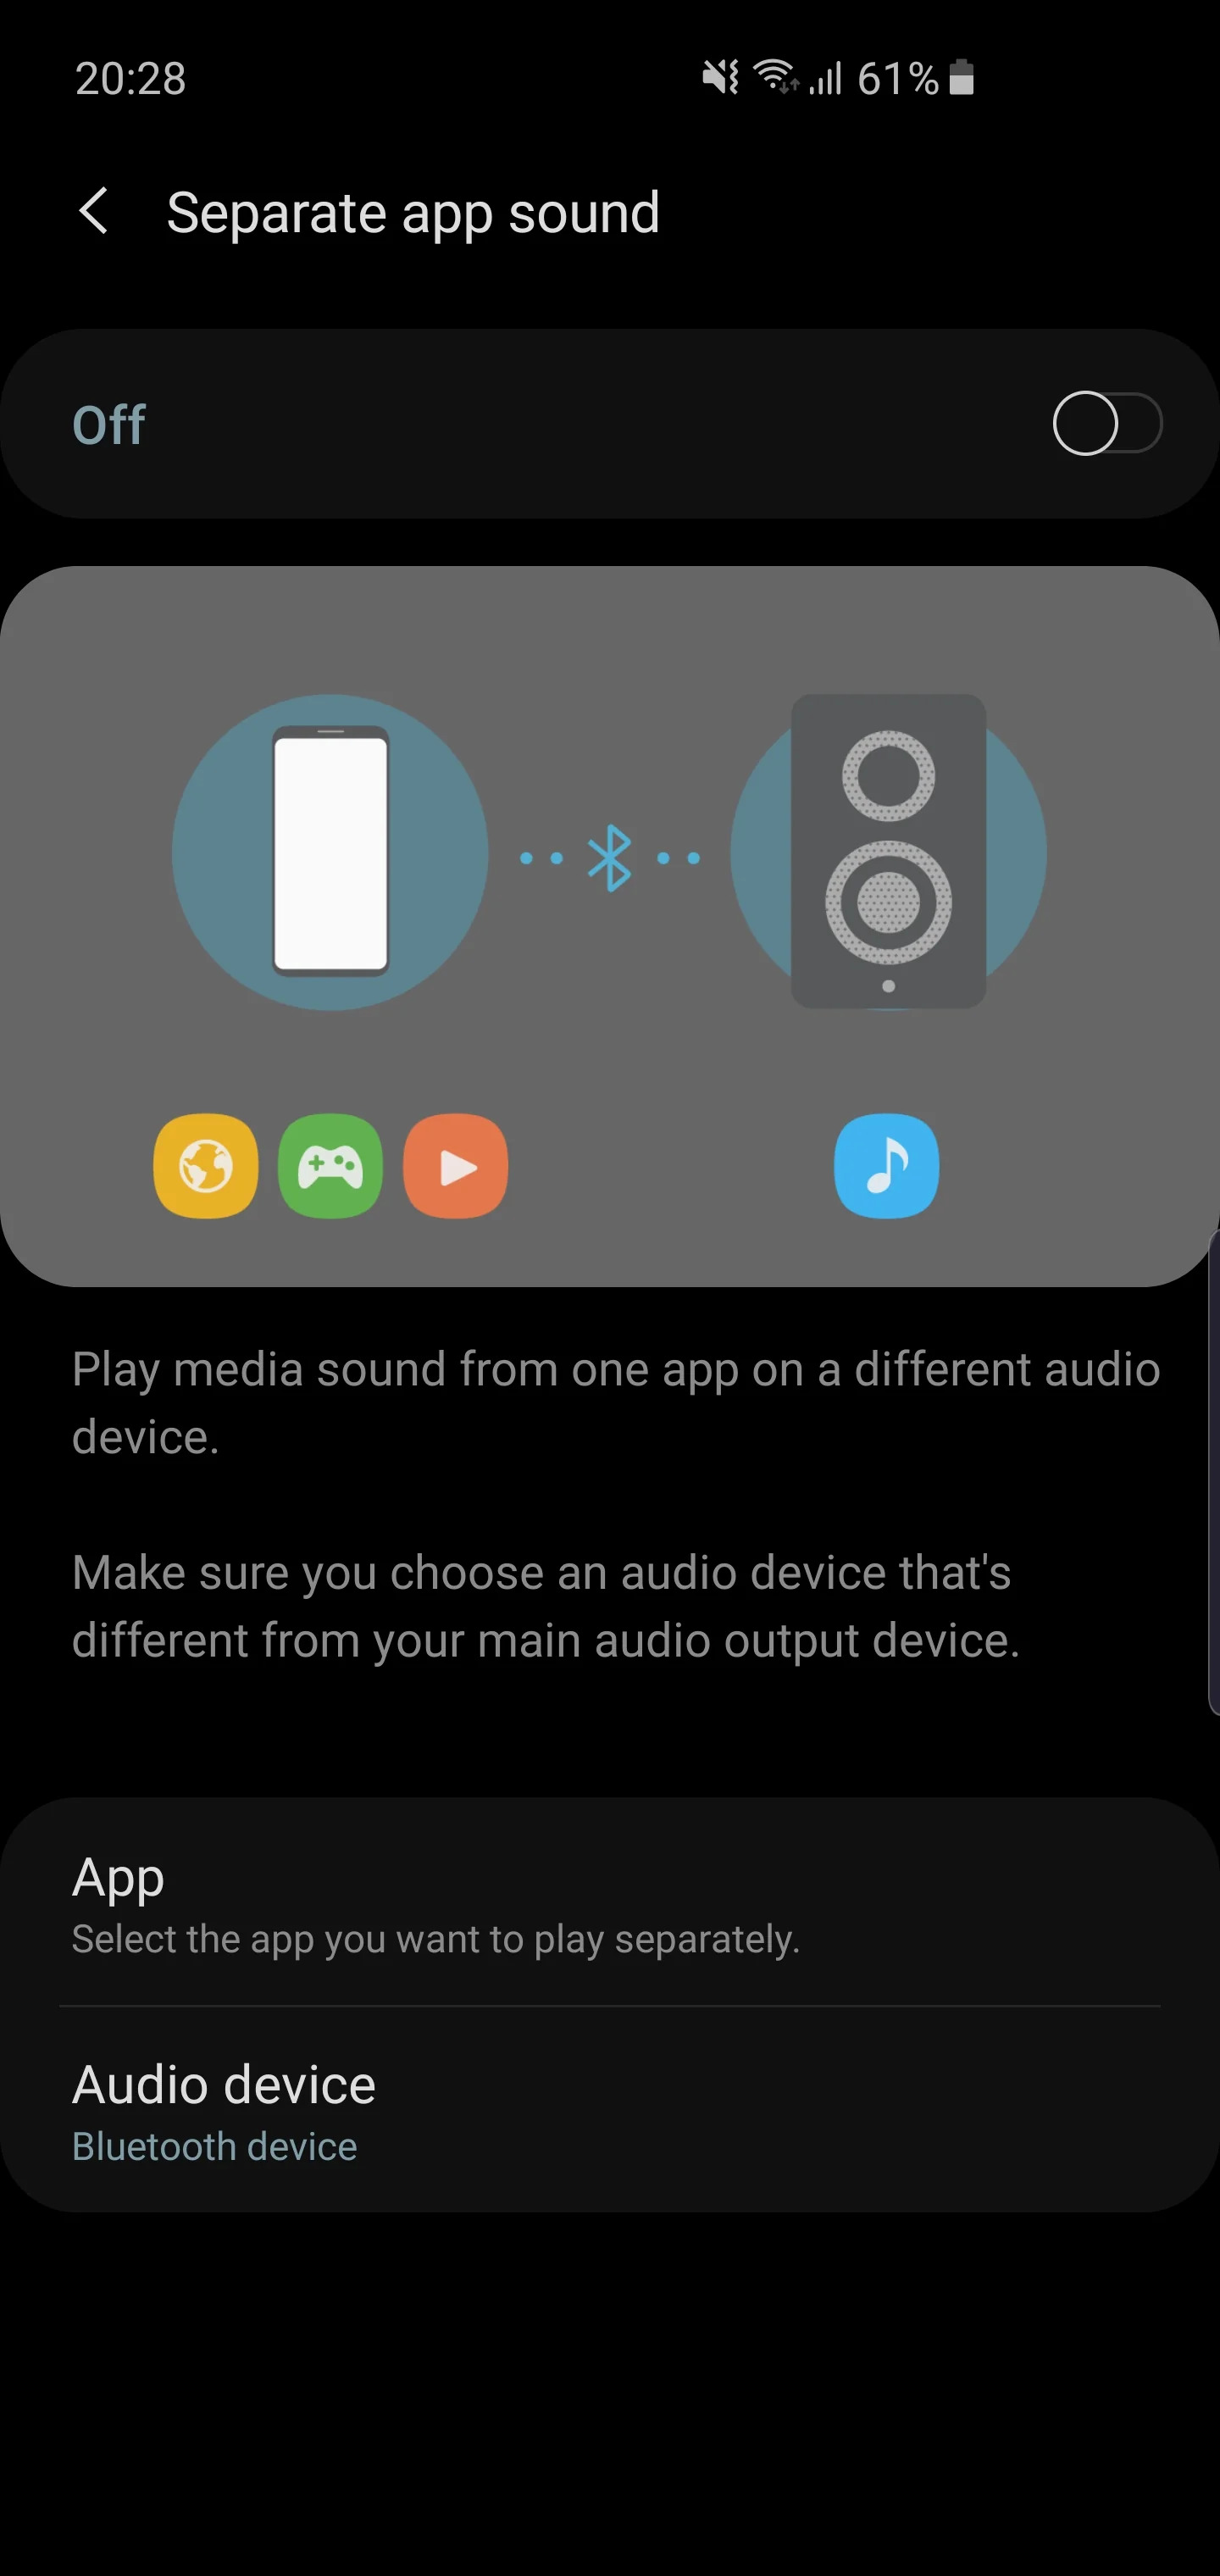 What Is Samsung Separate App Sound?